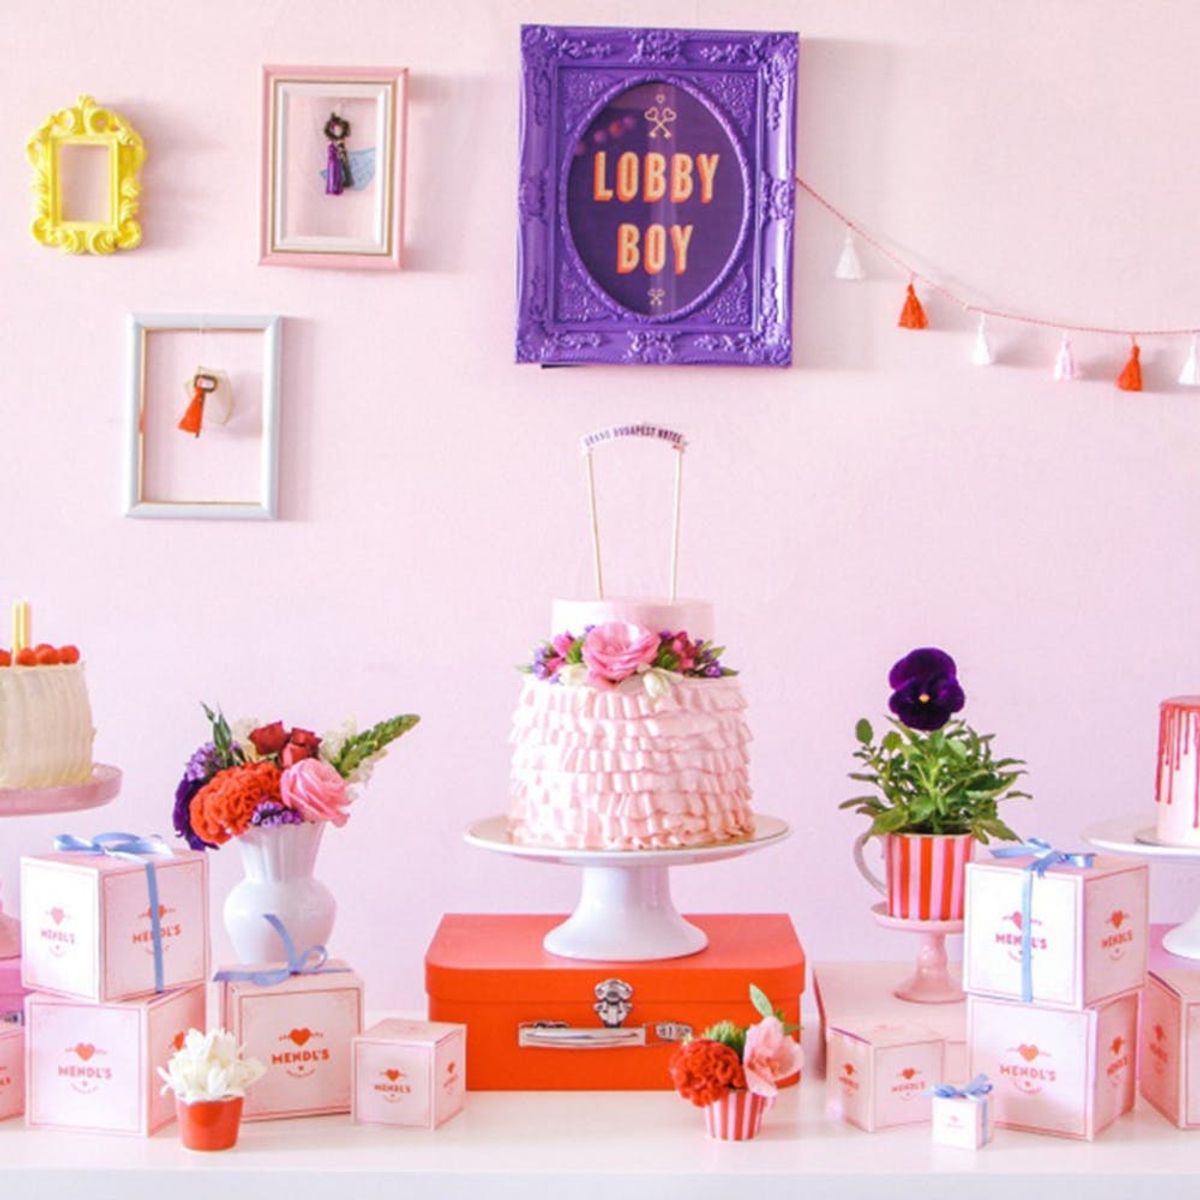 7 Unique Baby Shower Themes for Girls